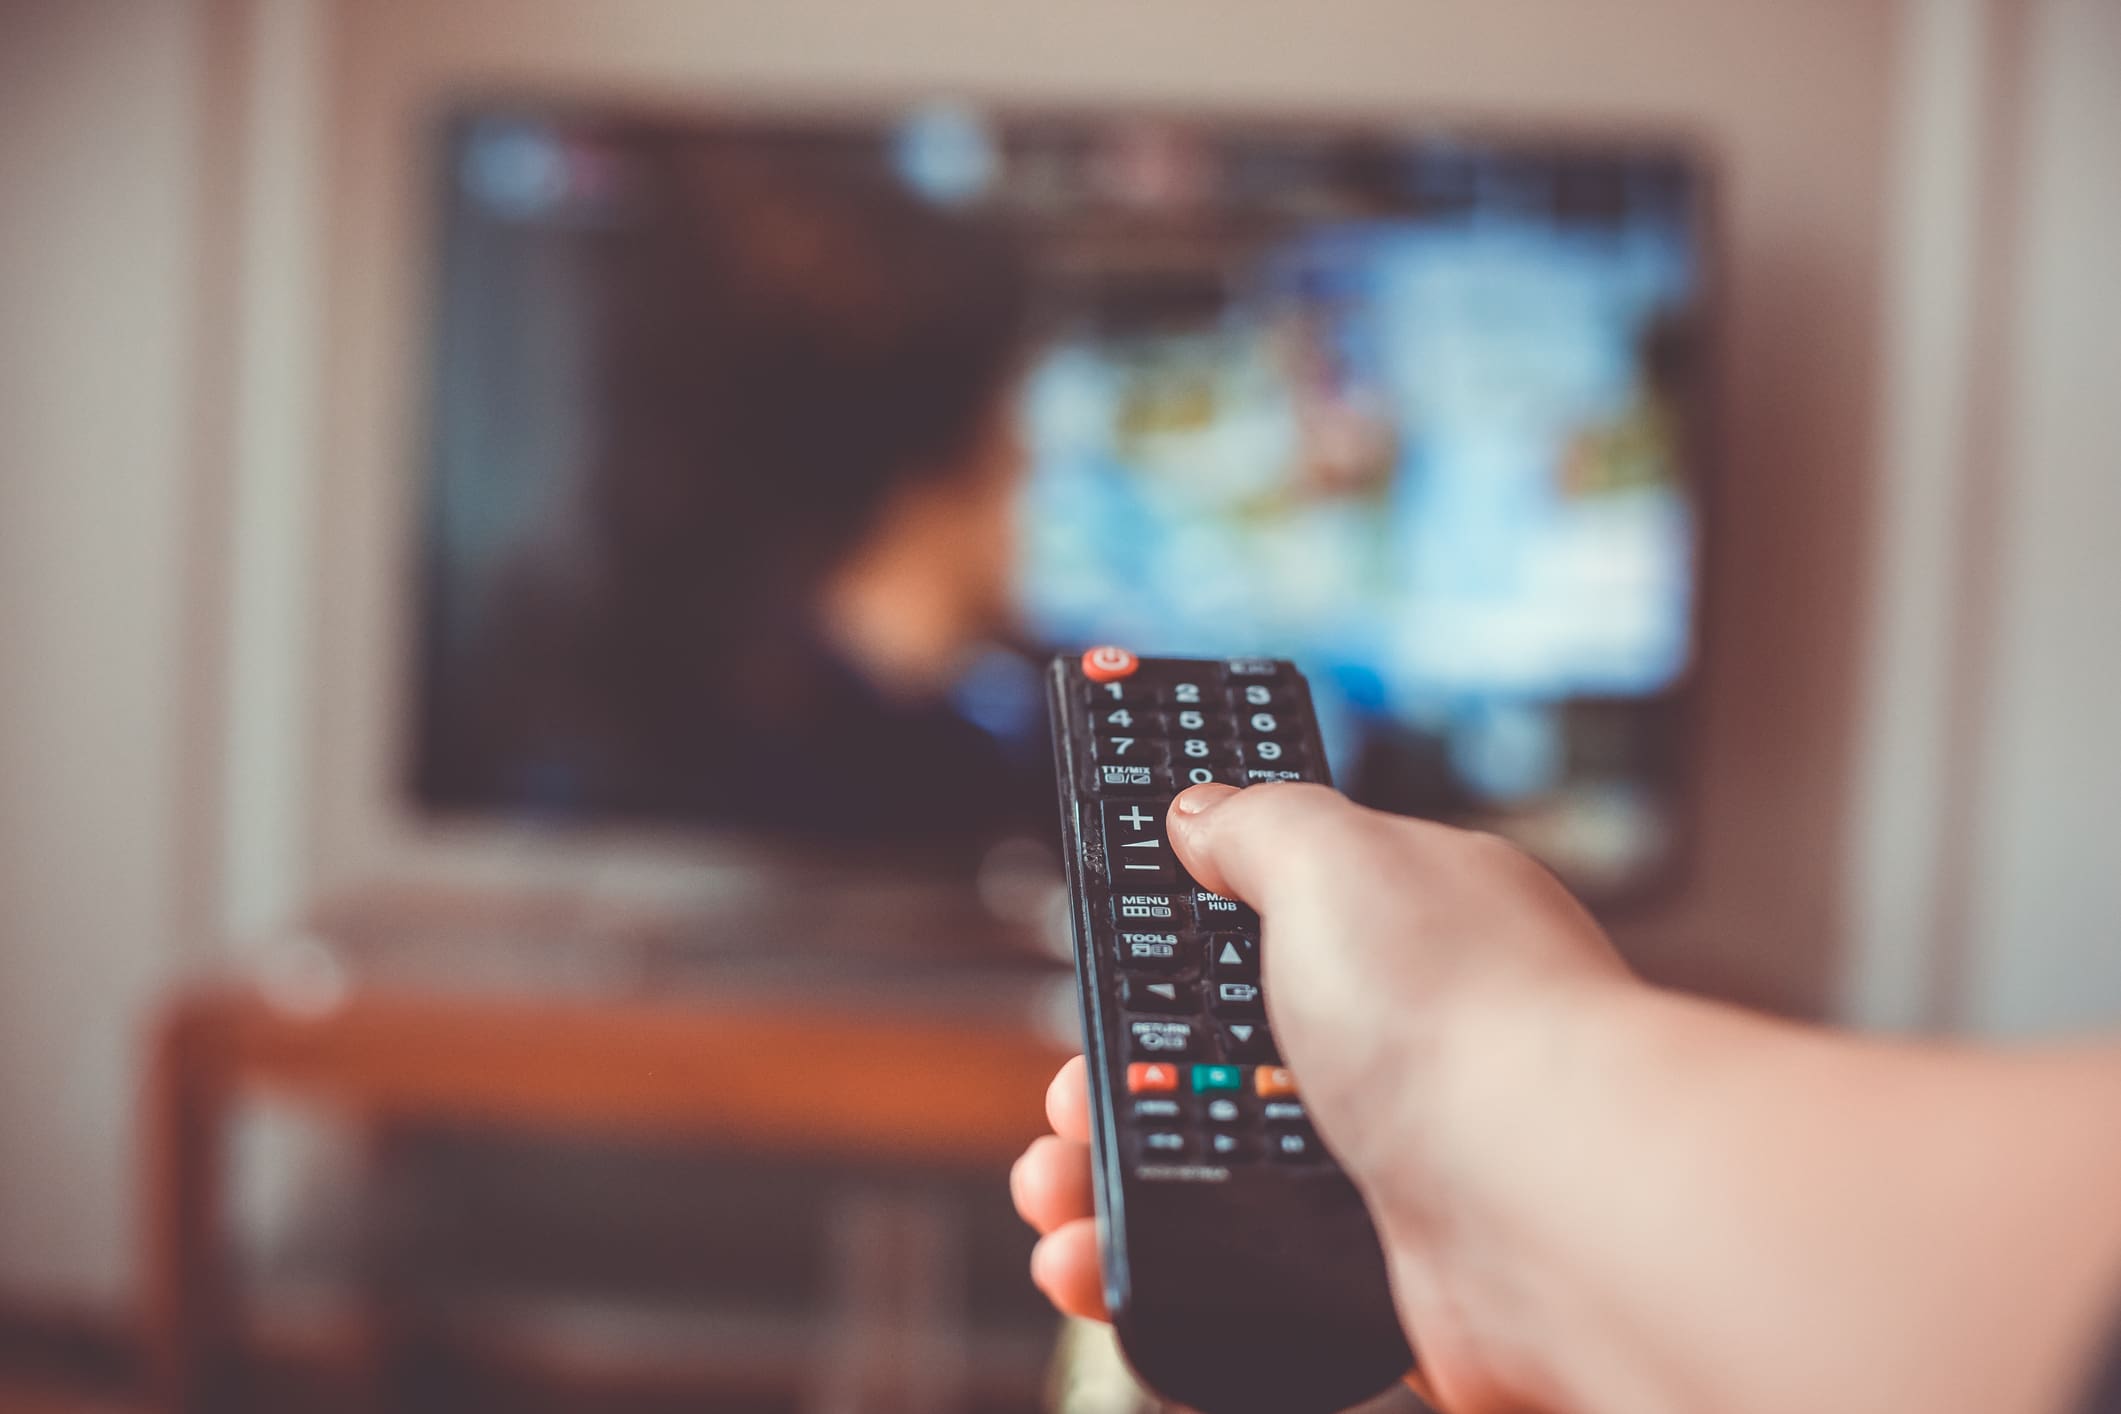 Remote pointed at a TV